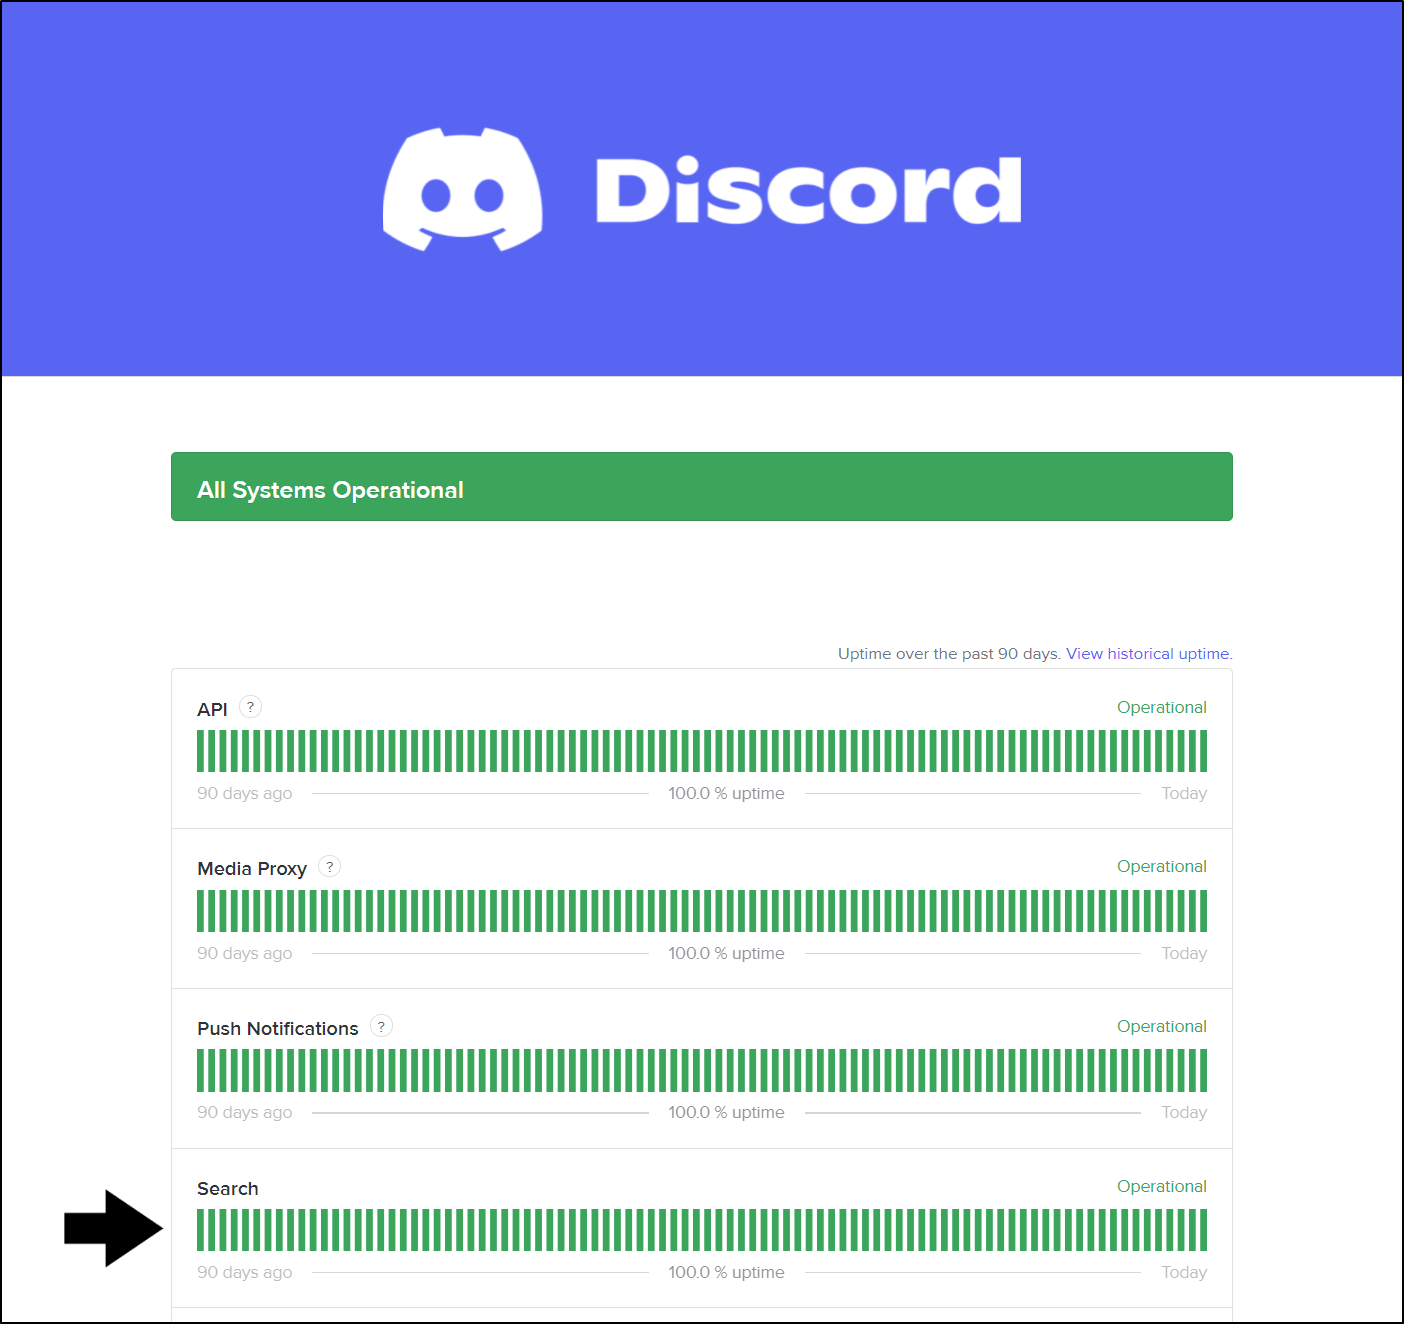 check the Discord server status on official server status page if Discord search bar or function not working or showing no results